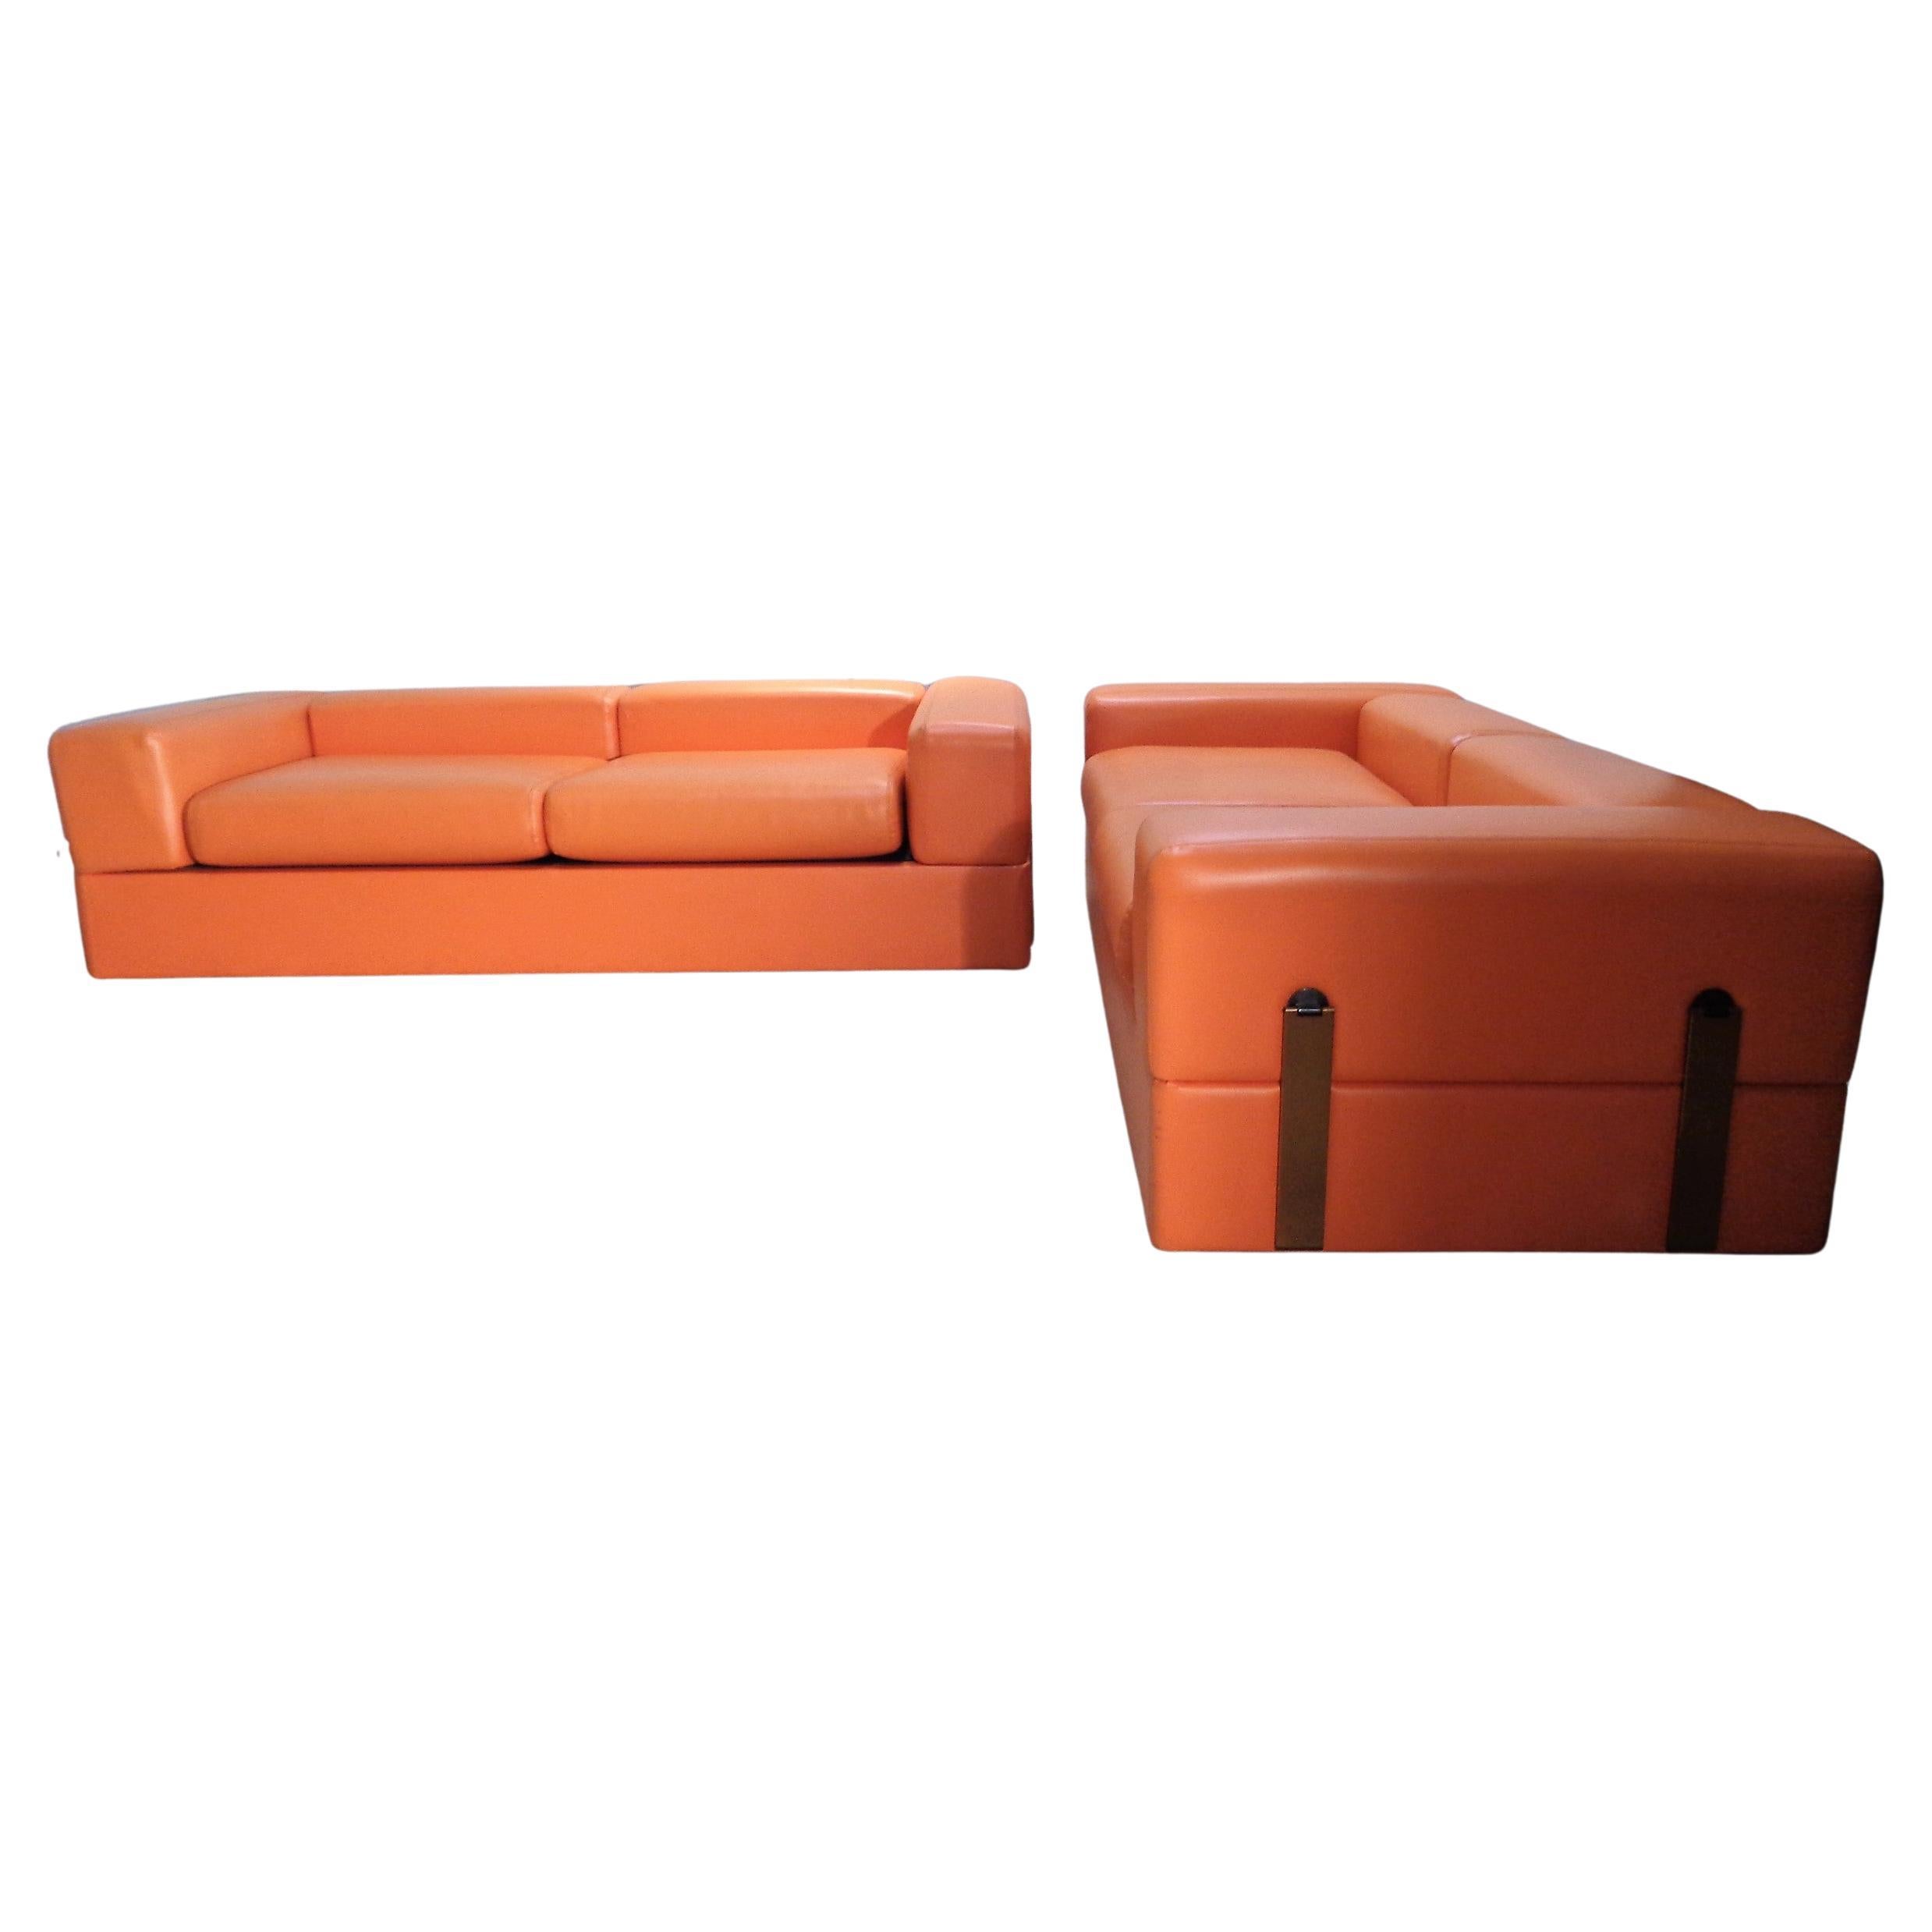  711 Daybed Sofas by Tito Agnoli for Cinova  For Sale 2